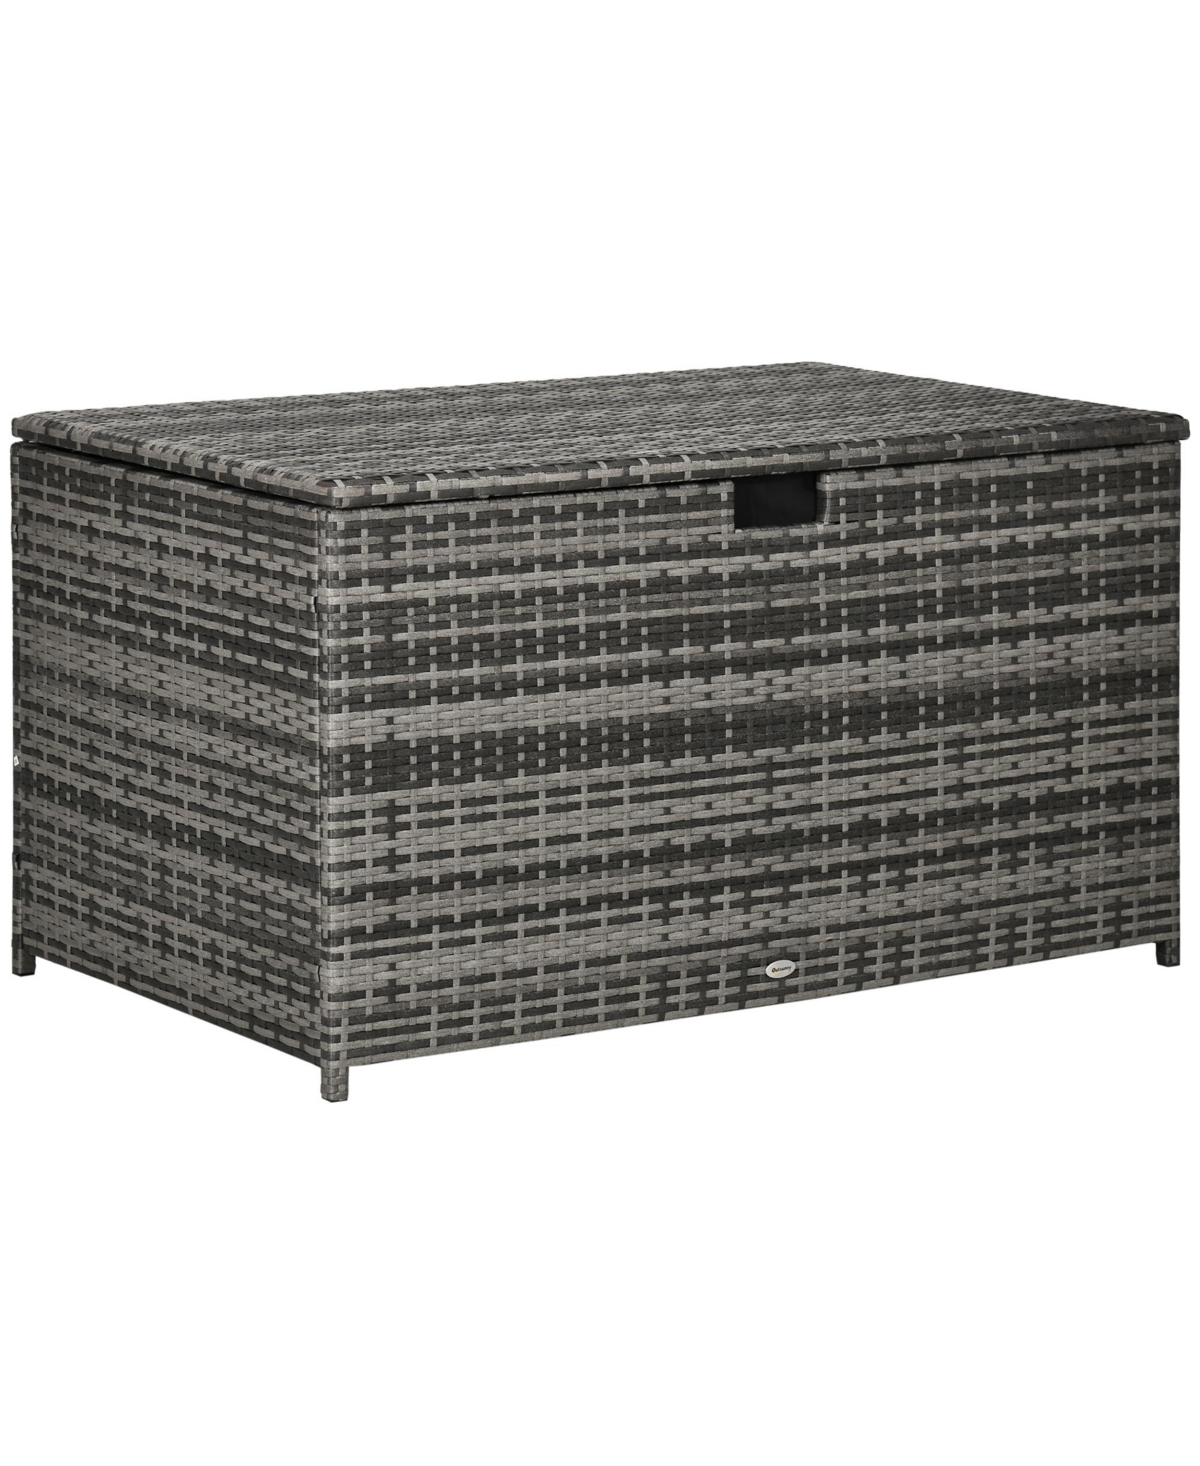 Outdoor Deck Box, Pe Rattan Wicker with Liner, Hydraulic Lift, and A Handle for Indoor, Outdoor, Patio Furniture Cushions, Pool, Toys, Garden